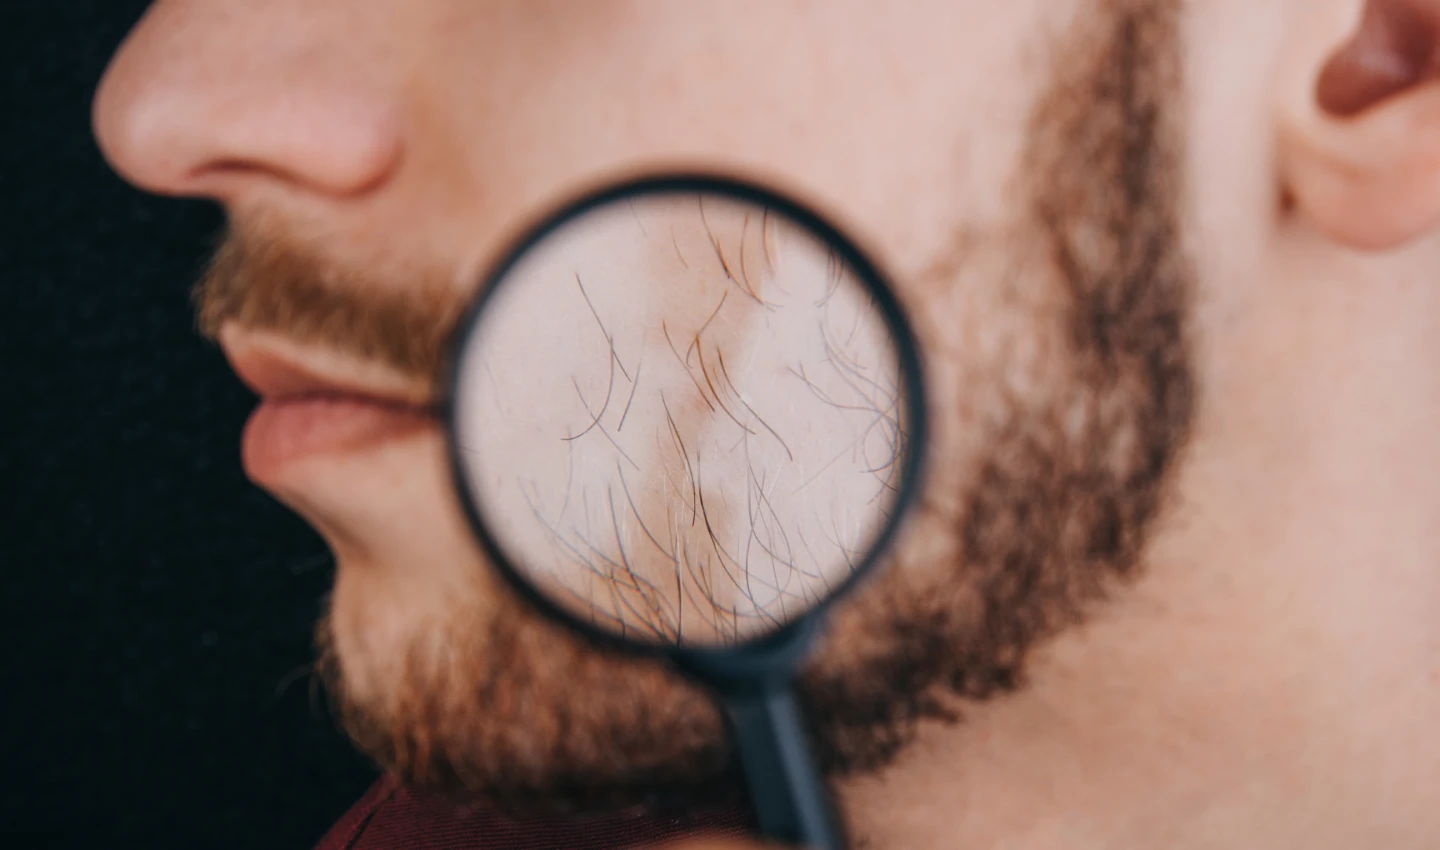 A man looks at his ingrown beard in a mirror while following the guide on preventing ingrown hairs.